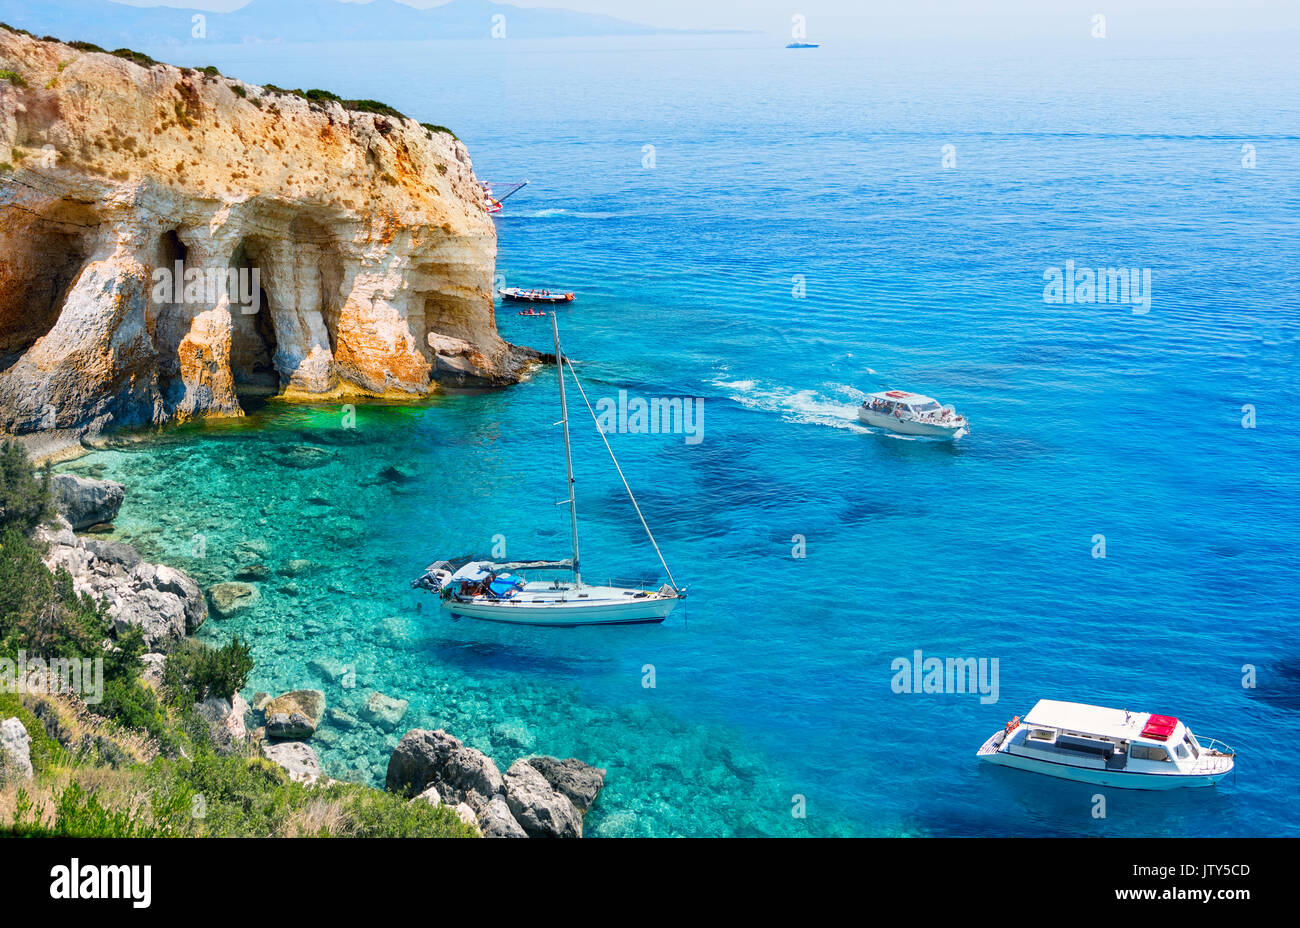 Greece, The island of Zakynthos. One of the most beautiful blue caves in the world. The Ionian Sea. Stock Photo